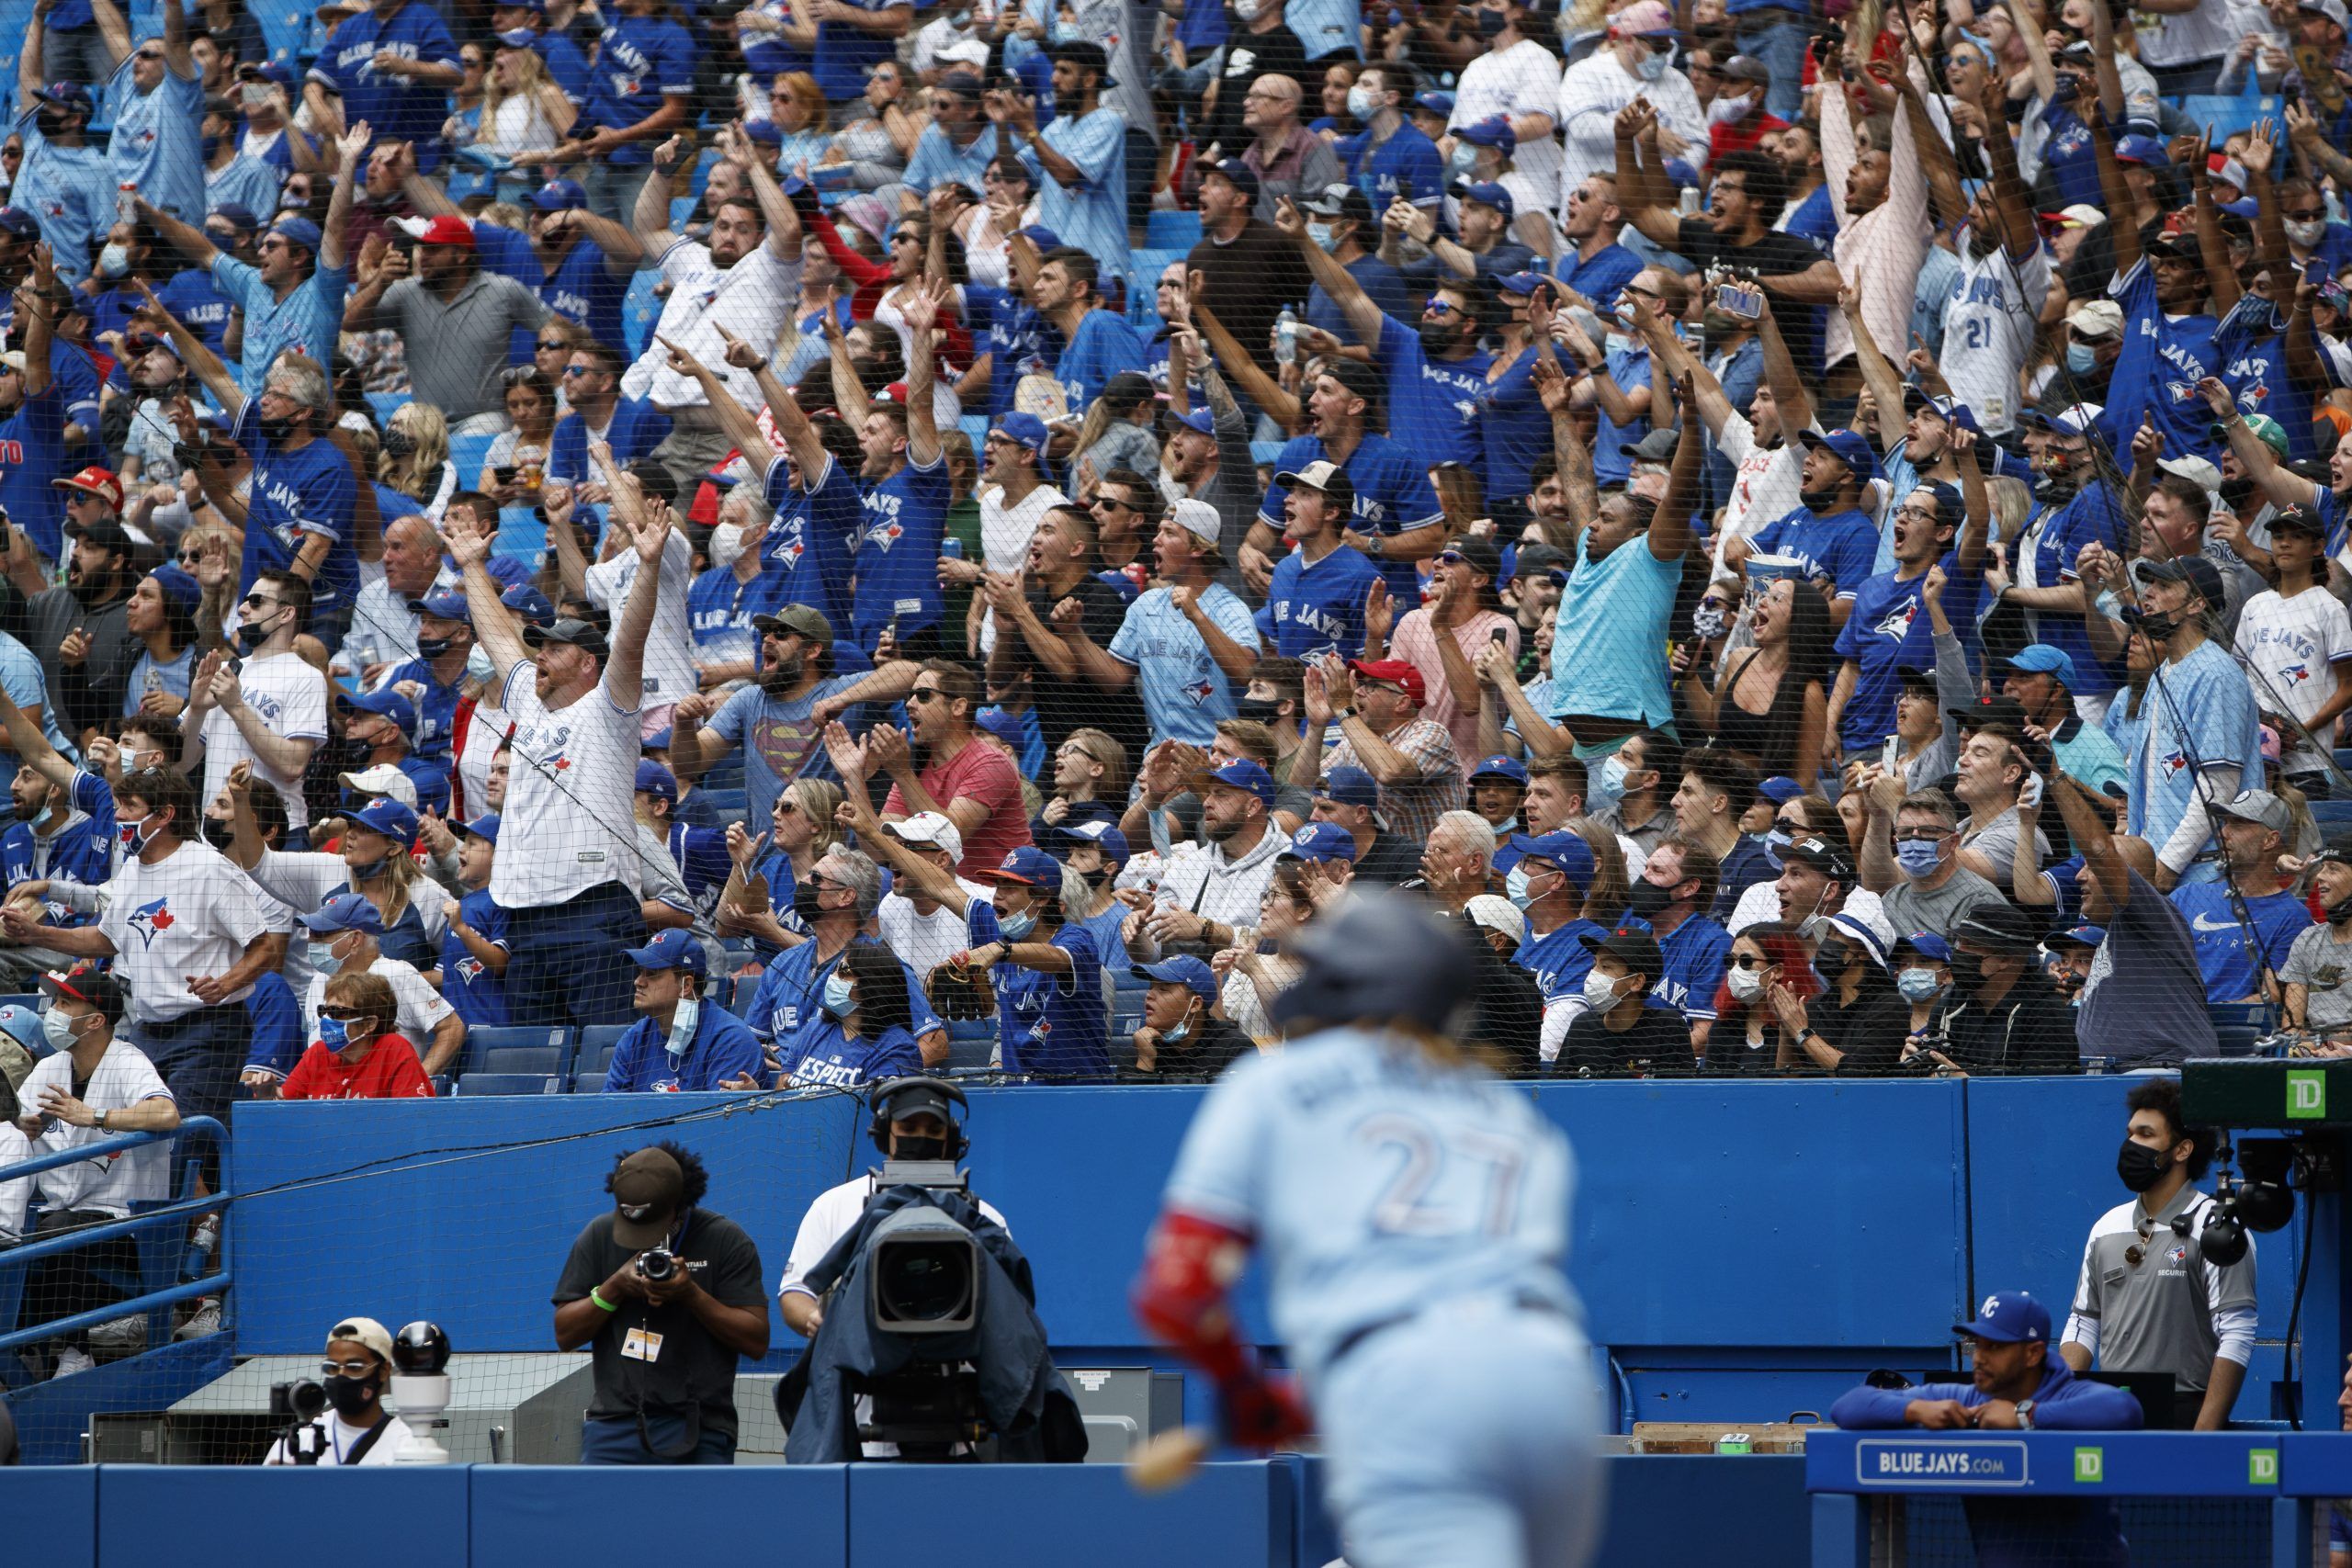 Blue Jays to require proof of vaccination or negative COVID test